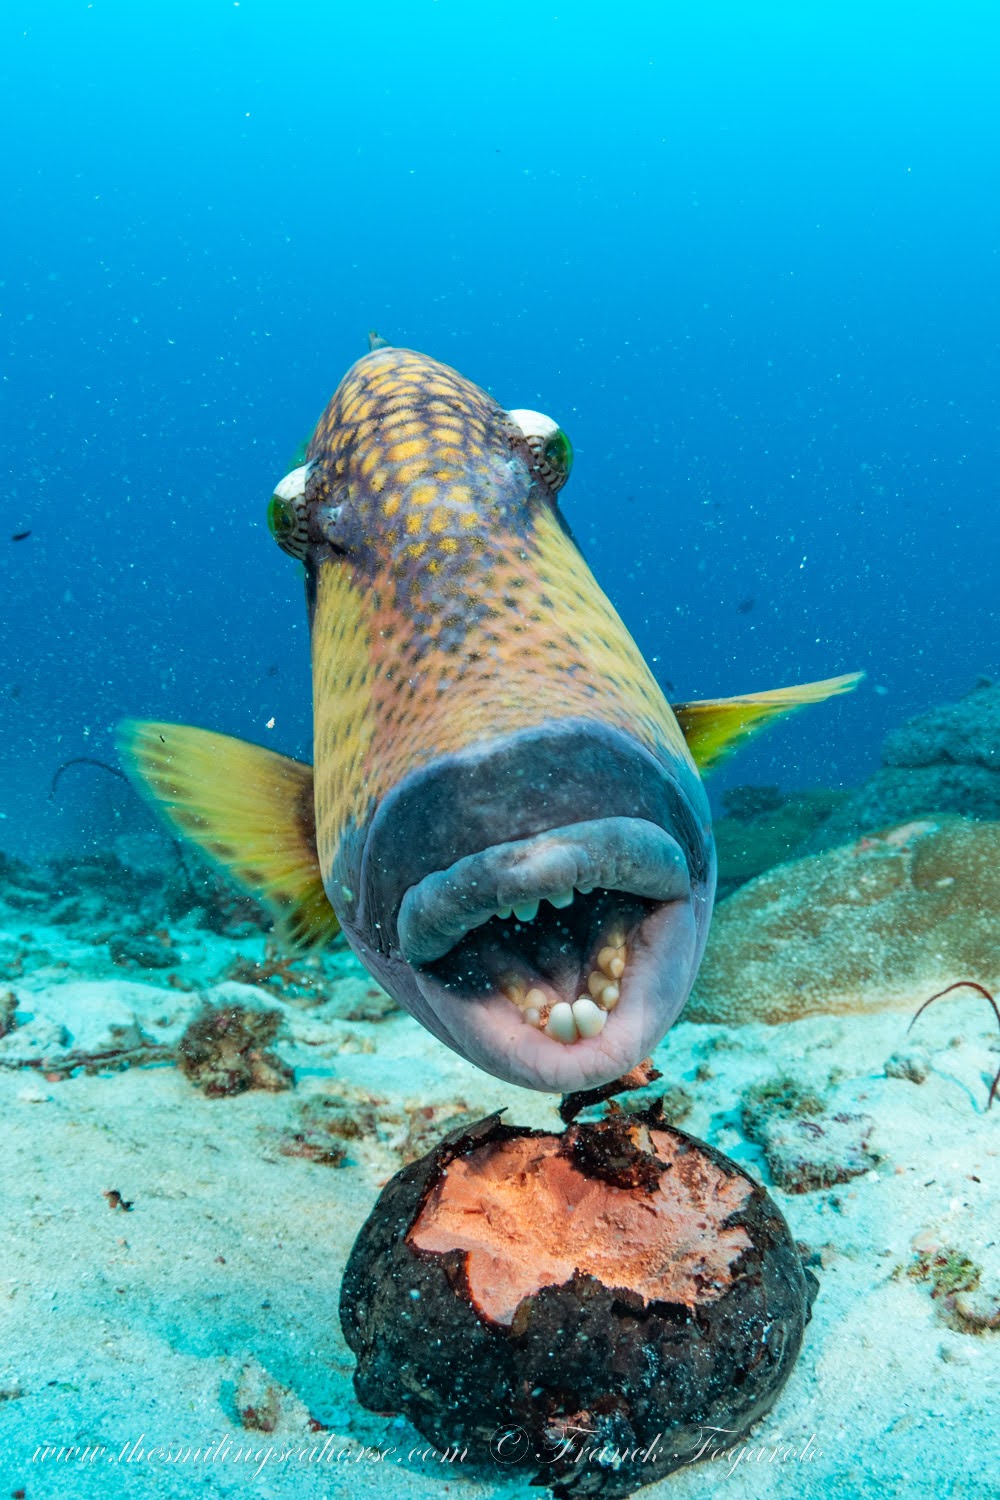 The impressive tooth of the titan triggerfish